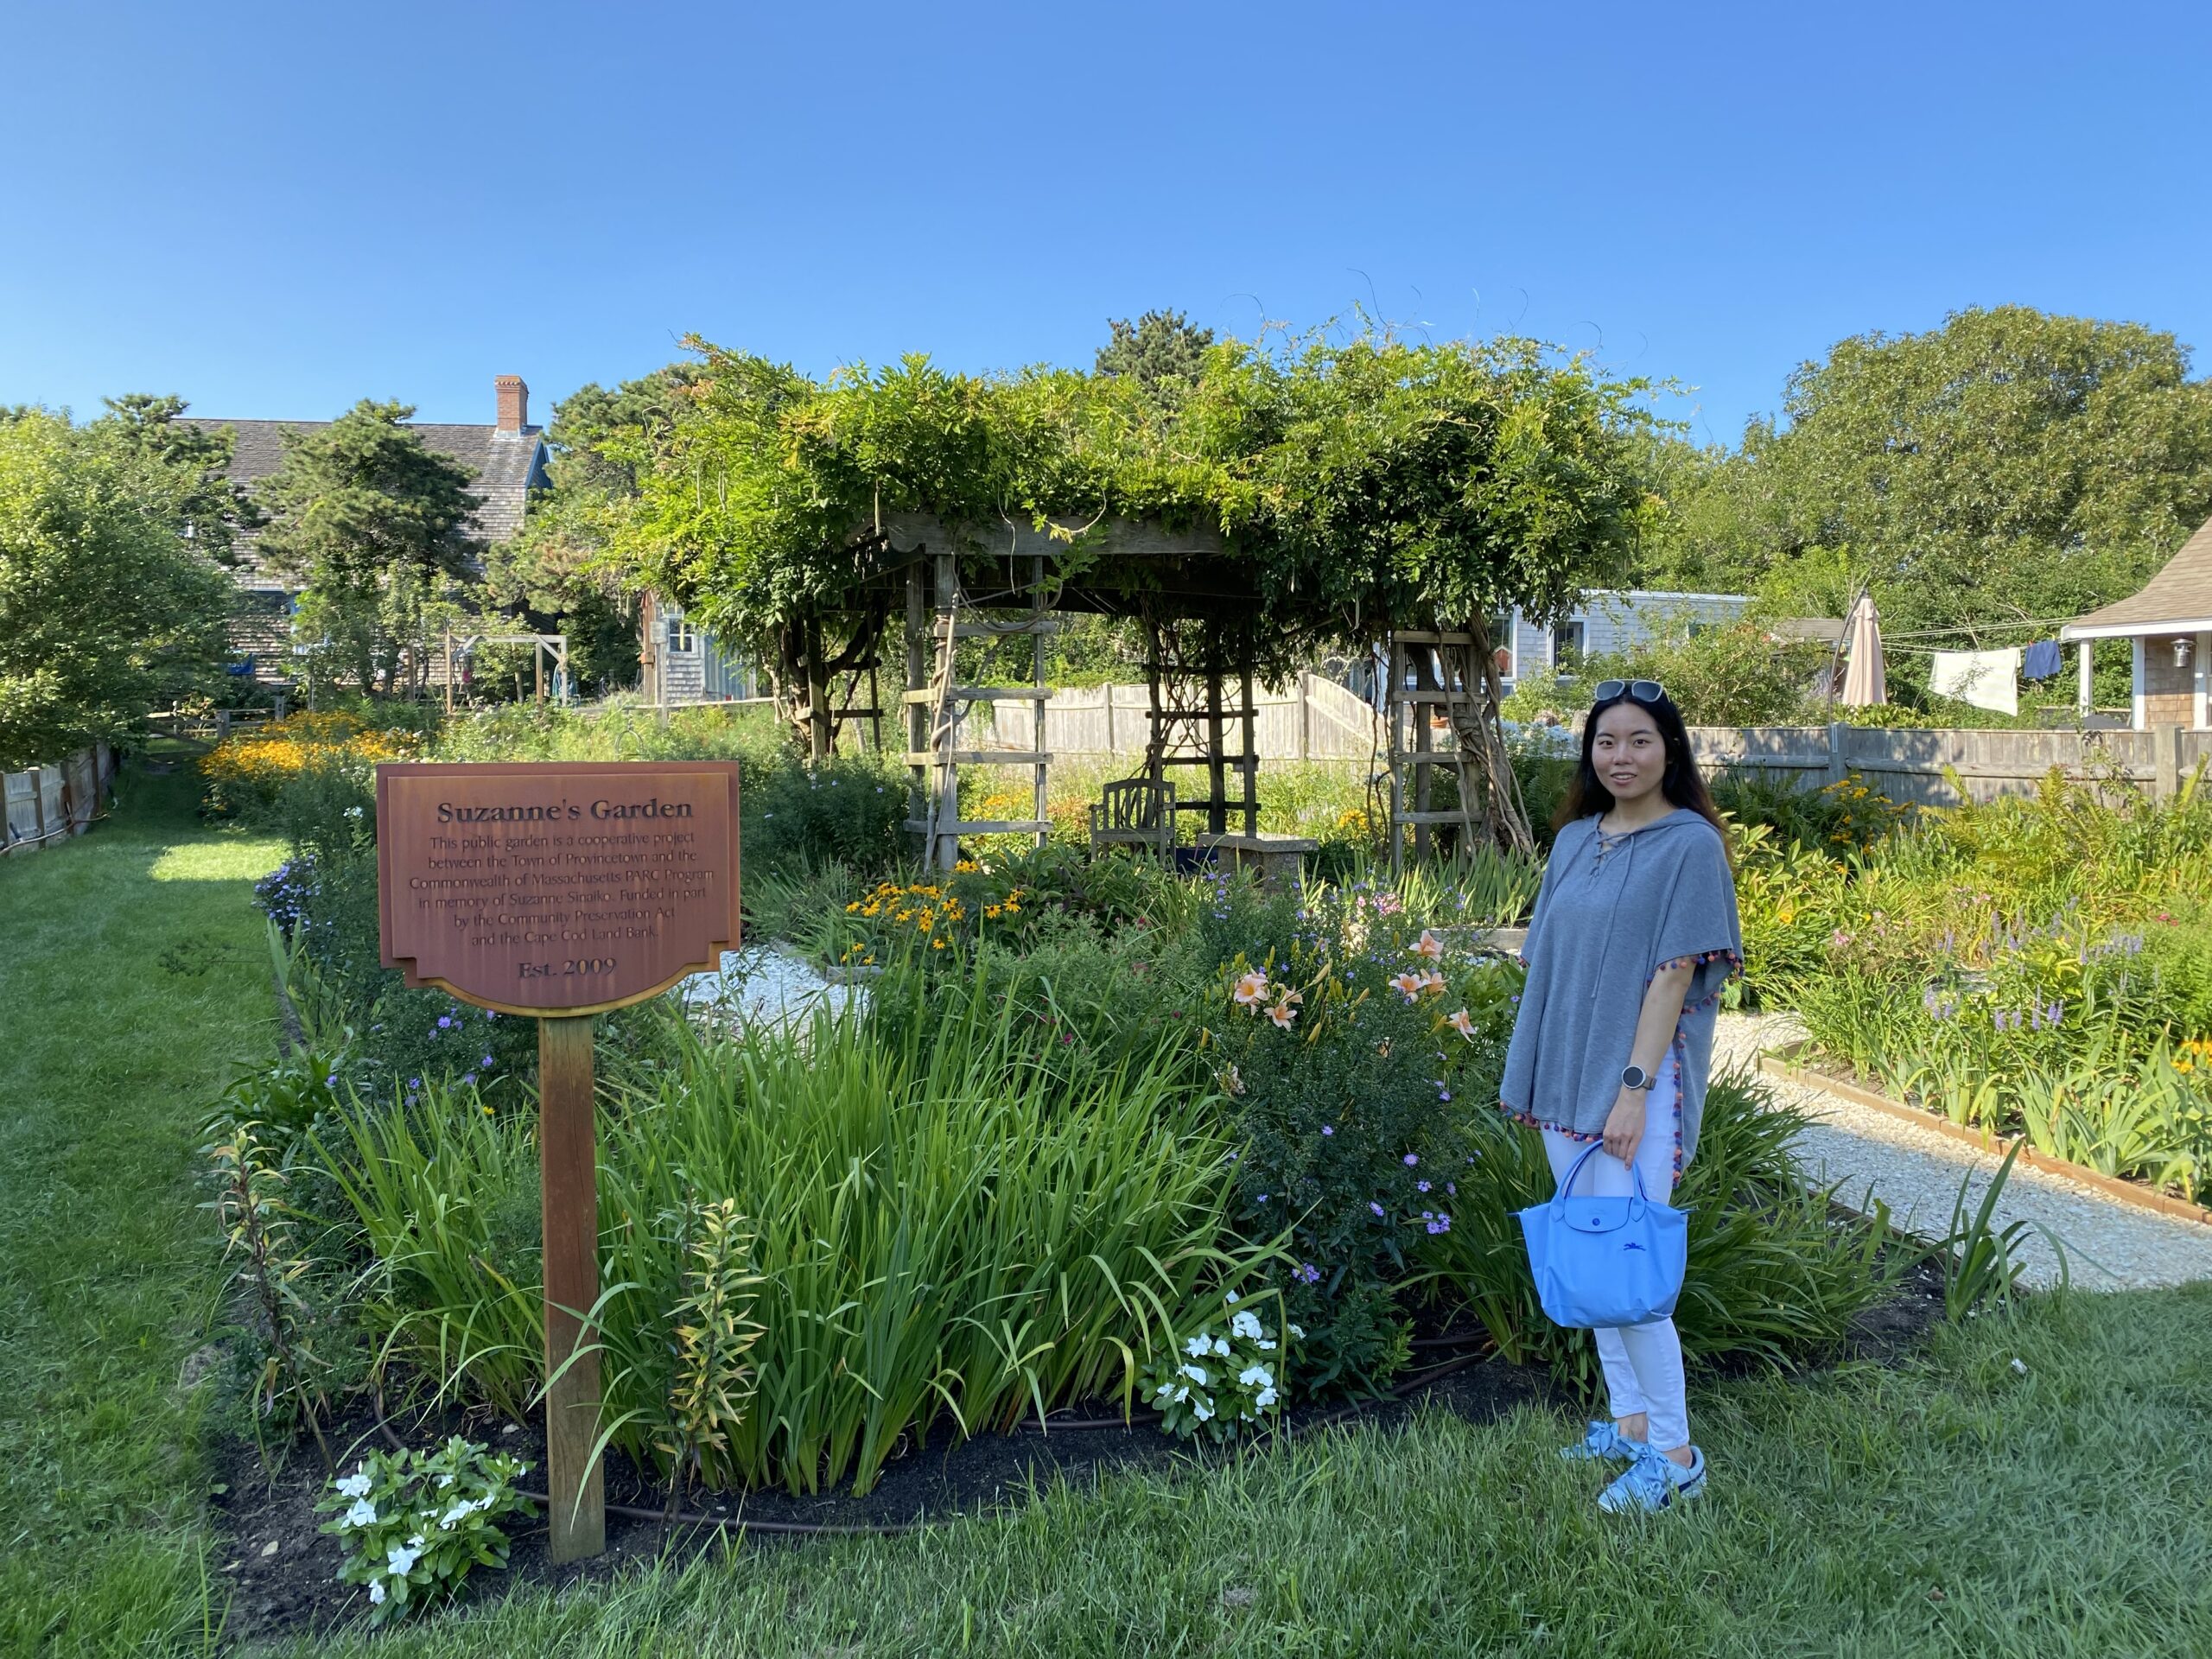 Yaqing Zhang at Suzanne's Garden